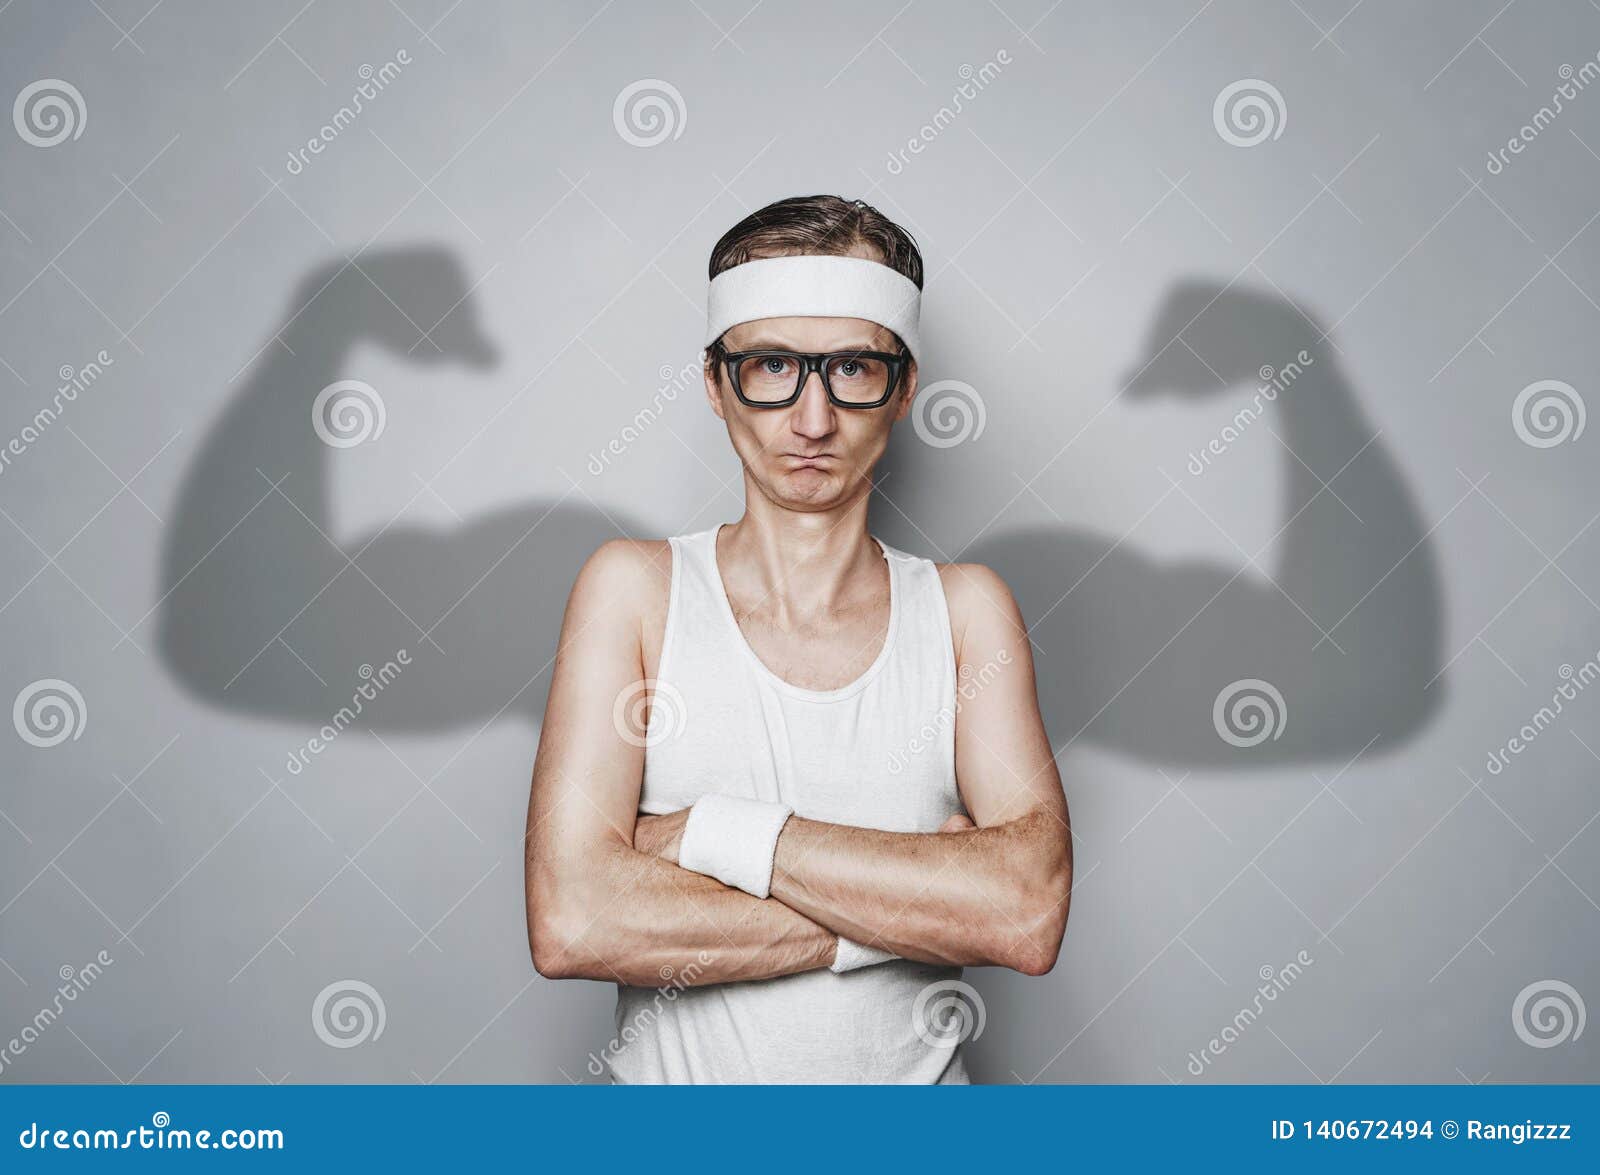 Funny Sport Nerd with Shadow Muscle Arms Stock Photo - Image of body ...